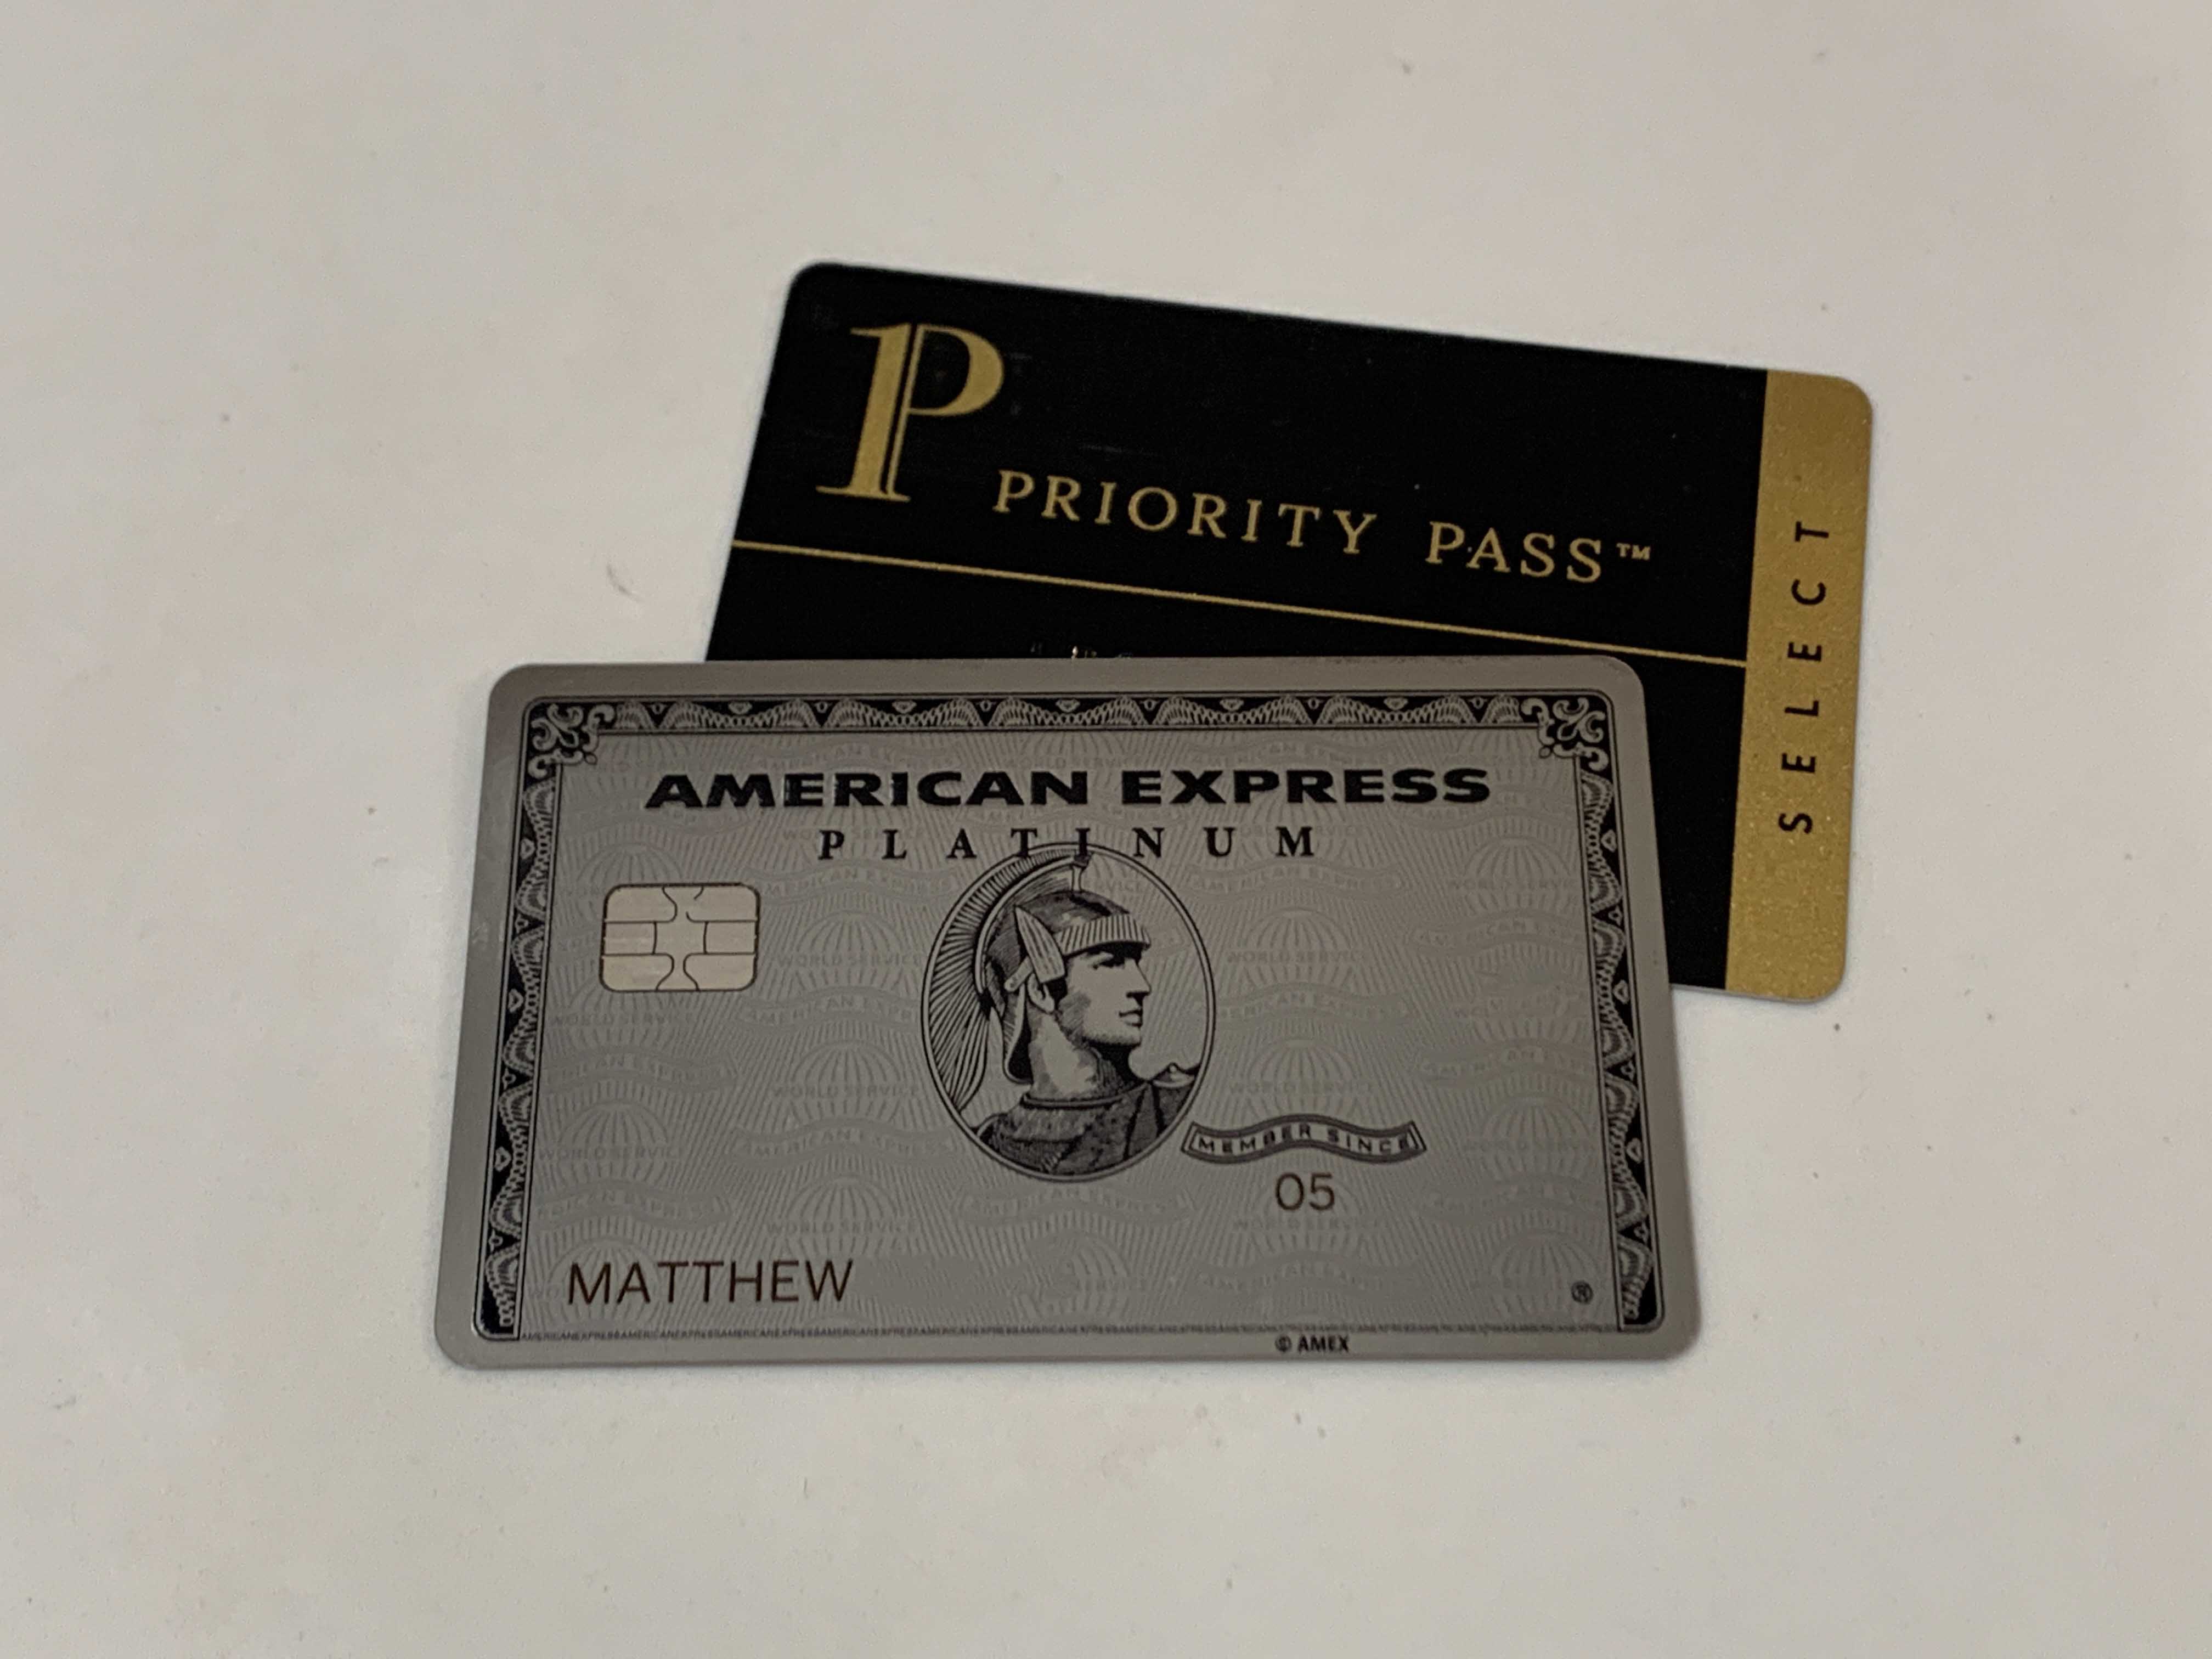 How AMEX Botched The Priority Pass Restaurant Issue - Live and